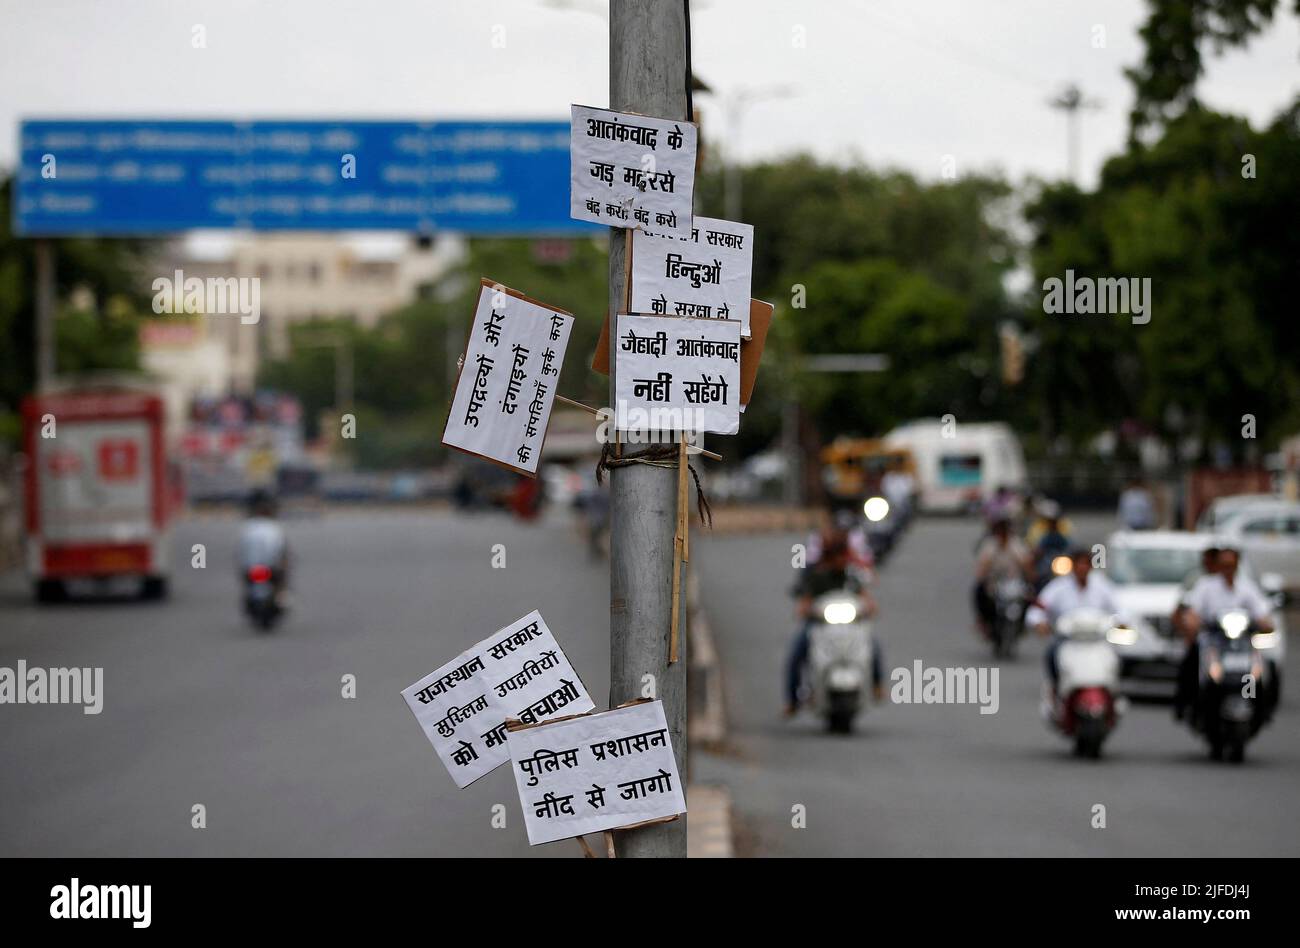 Placards are seen tied to a pole during restrictions imposed by authorities after the killing of Kanhaiya Lal Teli, a Hindu tailor, carried out by two suspected Muslim men who filmed the act and posted it online, in Udaipur, in the northwestern state of Rajasthan, India, July 1, 2022. The placards read: 'Shut down terrorism-breeding madrasas', 'Auction properties of rioters and trouble mongers', Will not tolerate jihadi terrorism', 'Rajasthan government, don't protect Muslim miscreants' and 'Wake up police administration'. REUTERS/Amit Dave Stock Photo